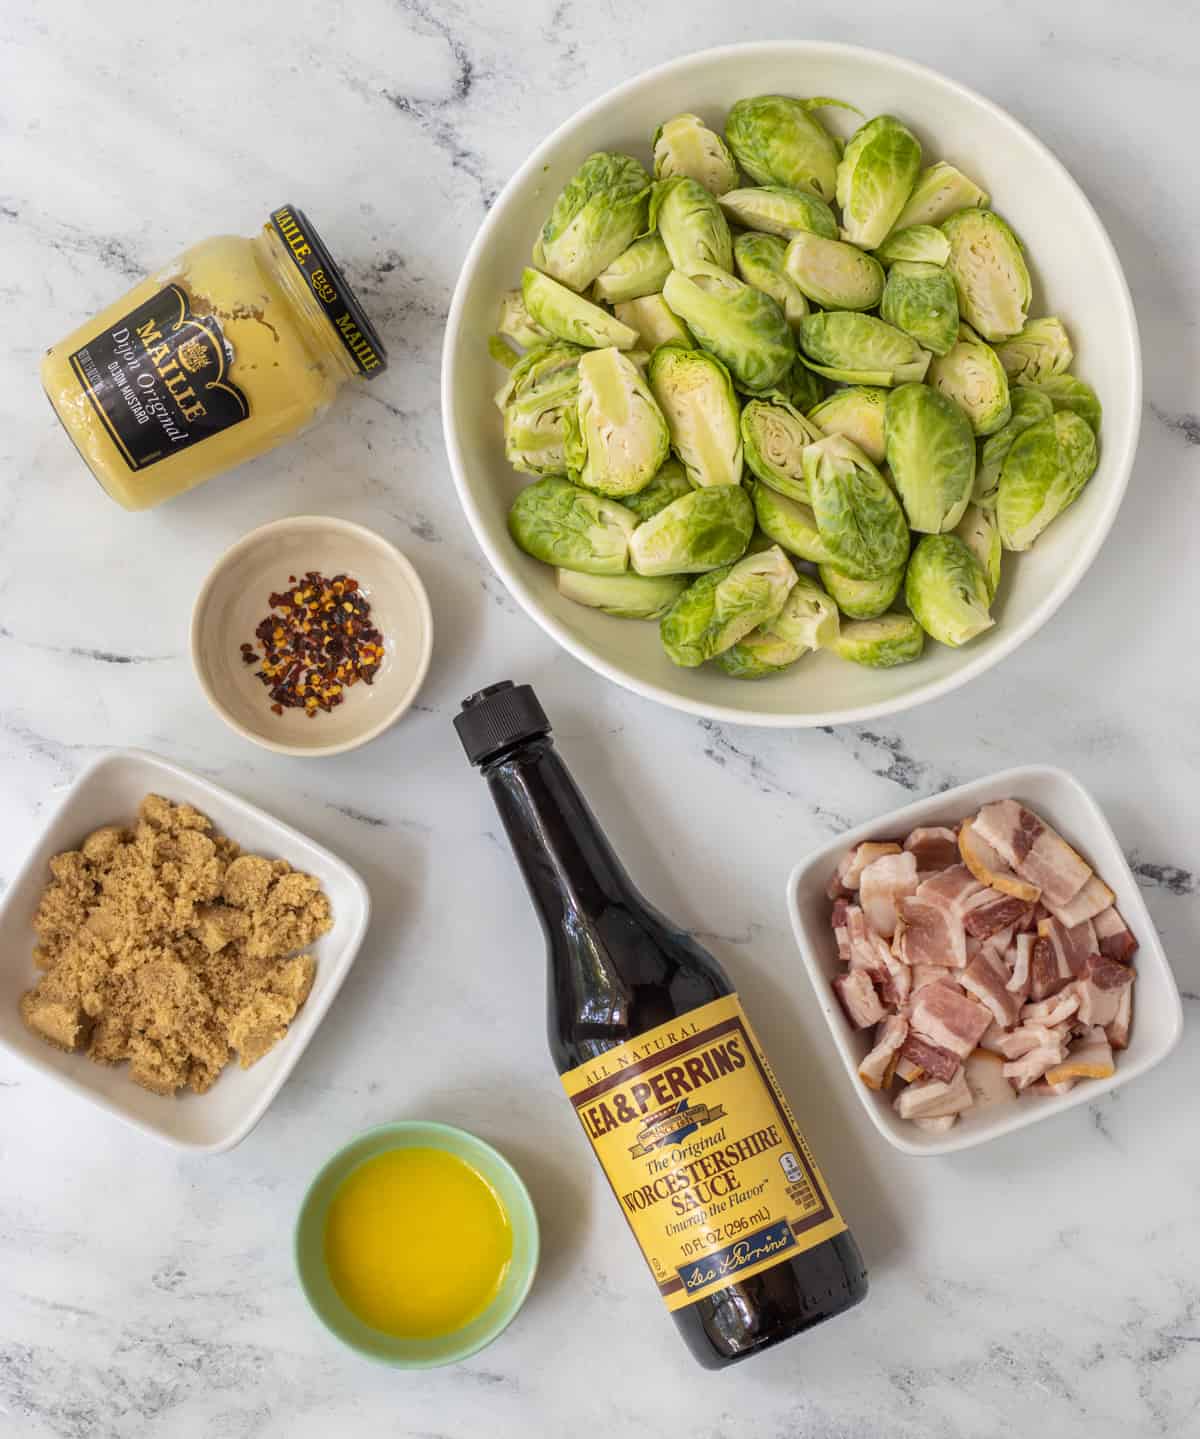 Ingredients for caramelized Brussels sprouts with bacon.